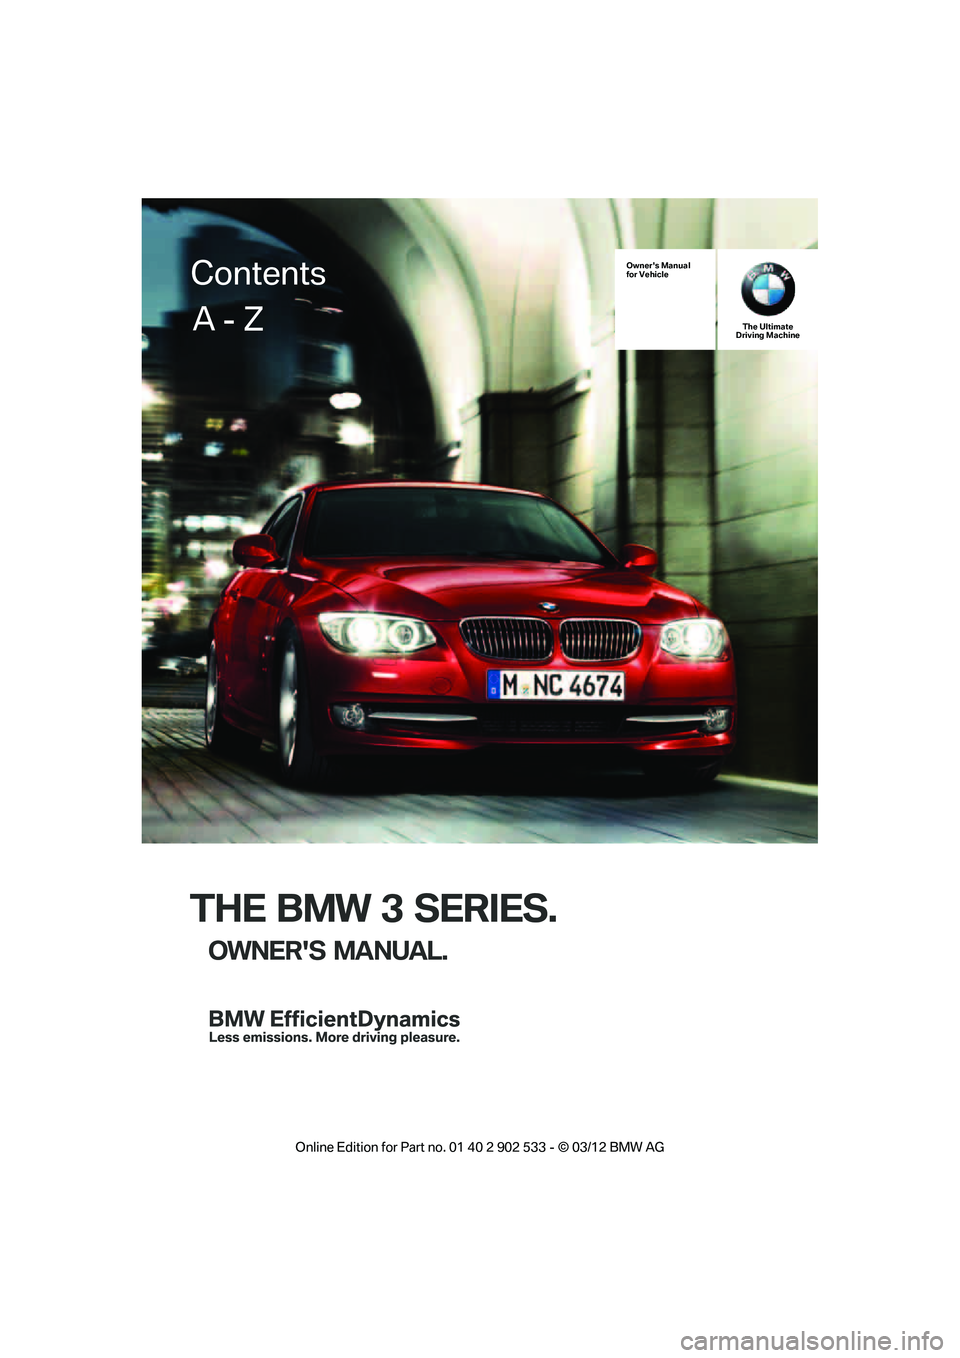 BMW 335I CONVERTIBLE 2013  Owners Manual THE BMW 3 SERIES.
OWNERS MANUAL.
Owners Manual
for VehicleThe Ultimate
Driving Machine
Contents
A - Z

00320051004F004C00510048000300280047004C0057004C005200510003  